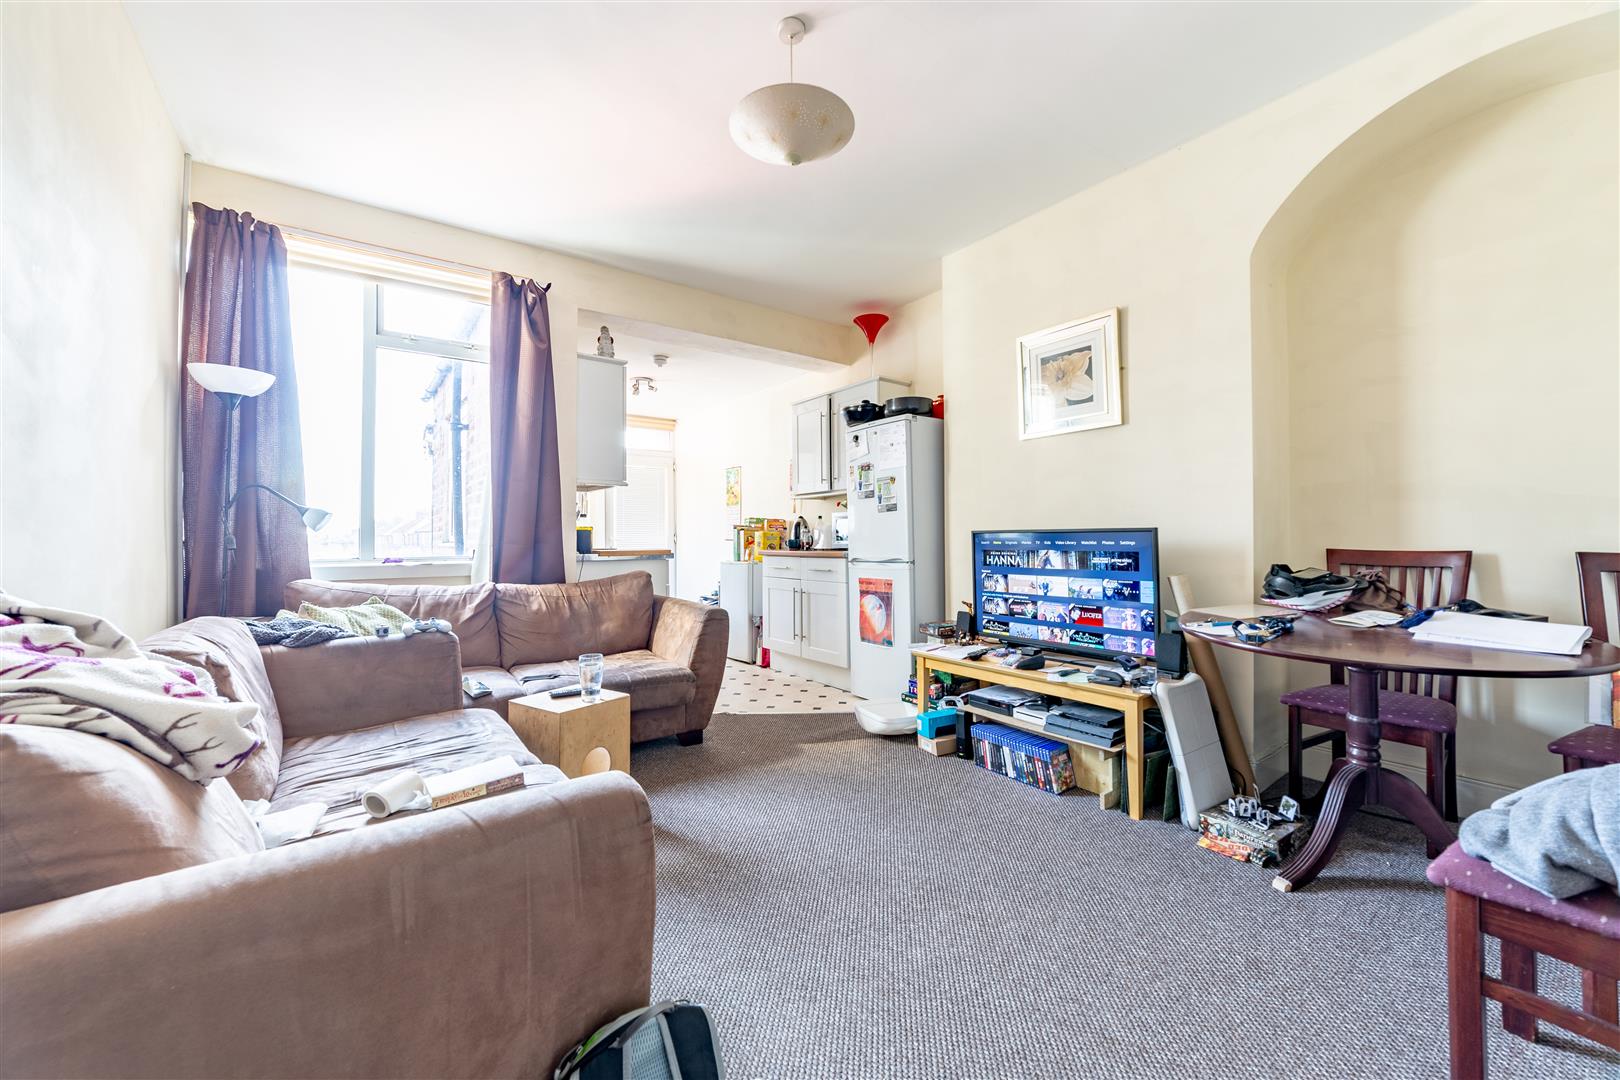 4 bed maisonette for sale in Benton Road, High Heaton - Property Image 1